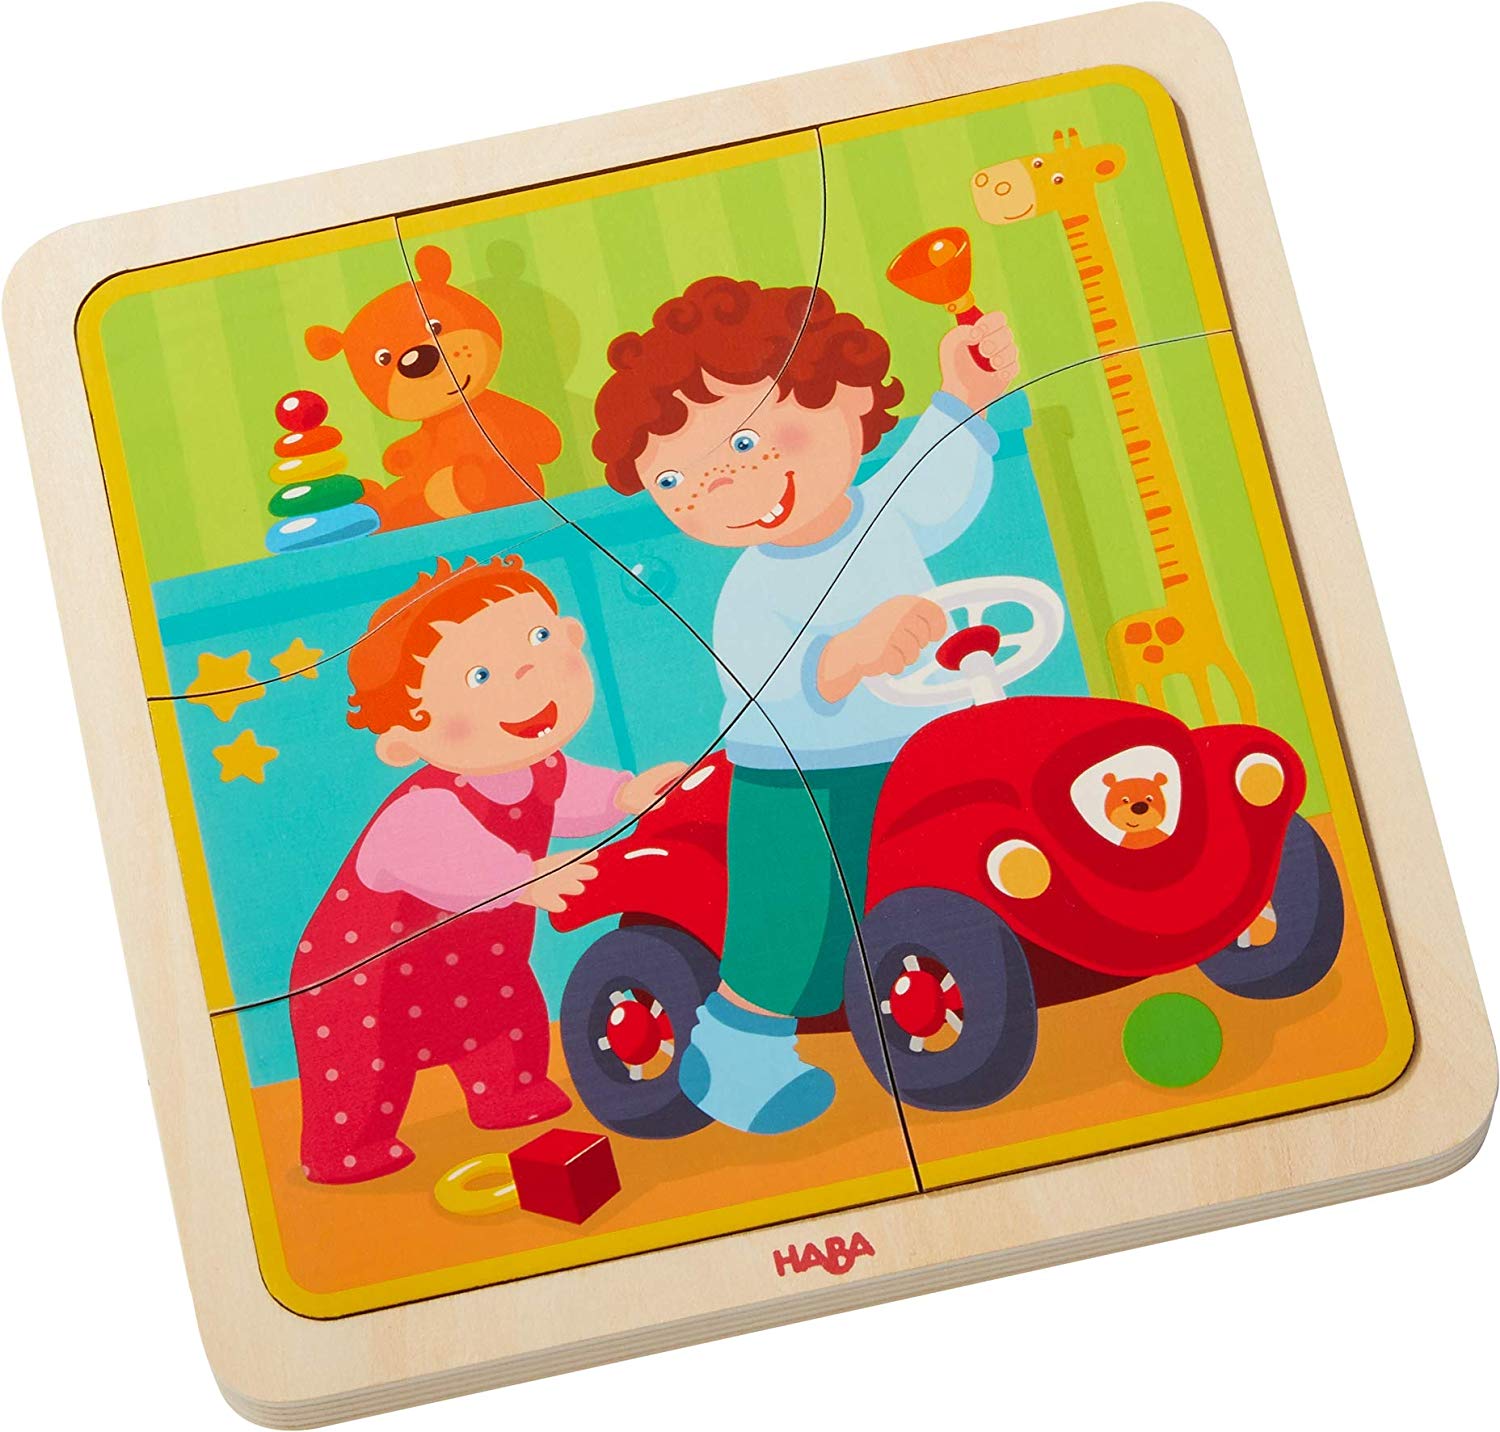 Cute Childrens Jigsaw Puzzle Wooden My Life And Motor Skills Toy For Age 3